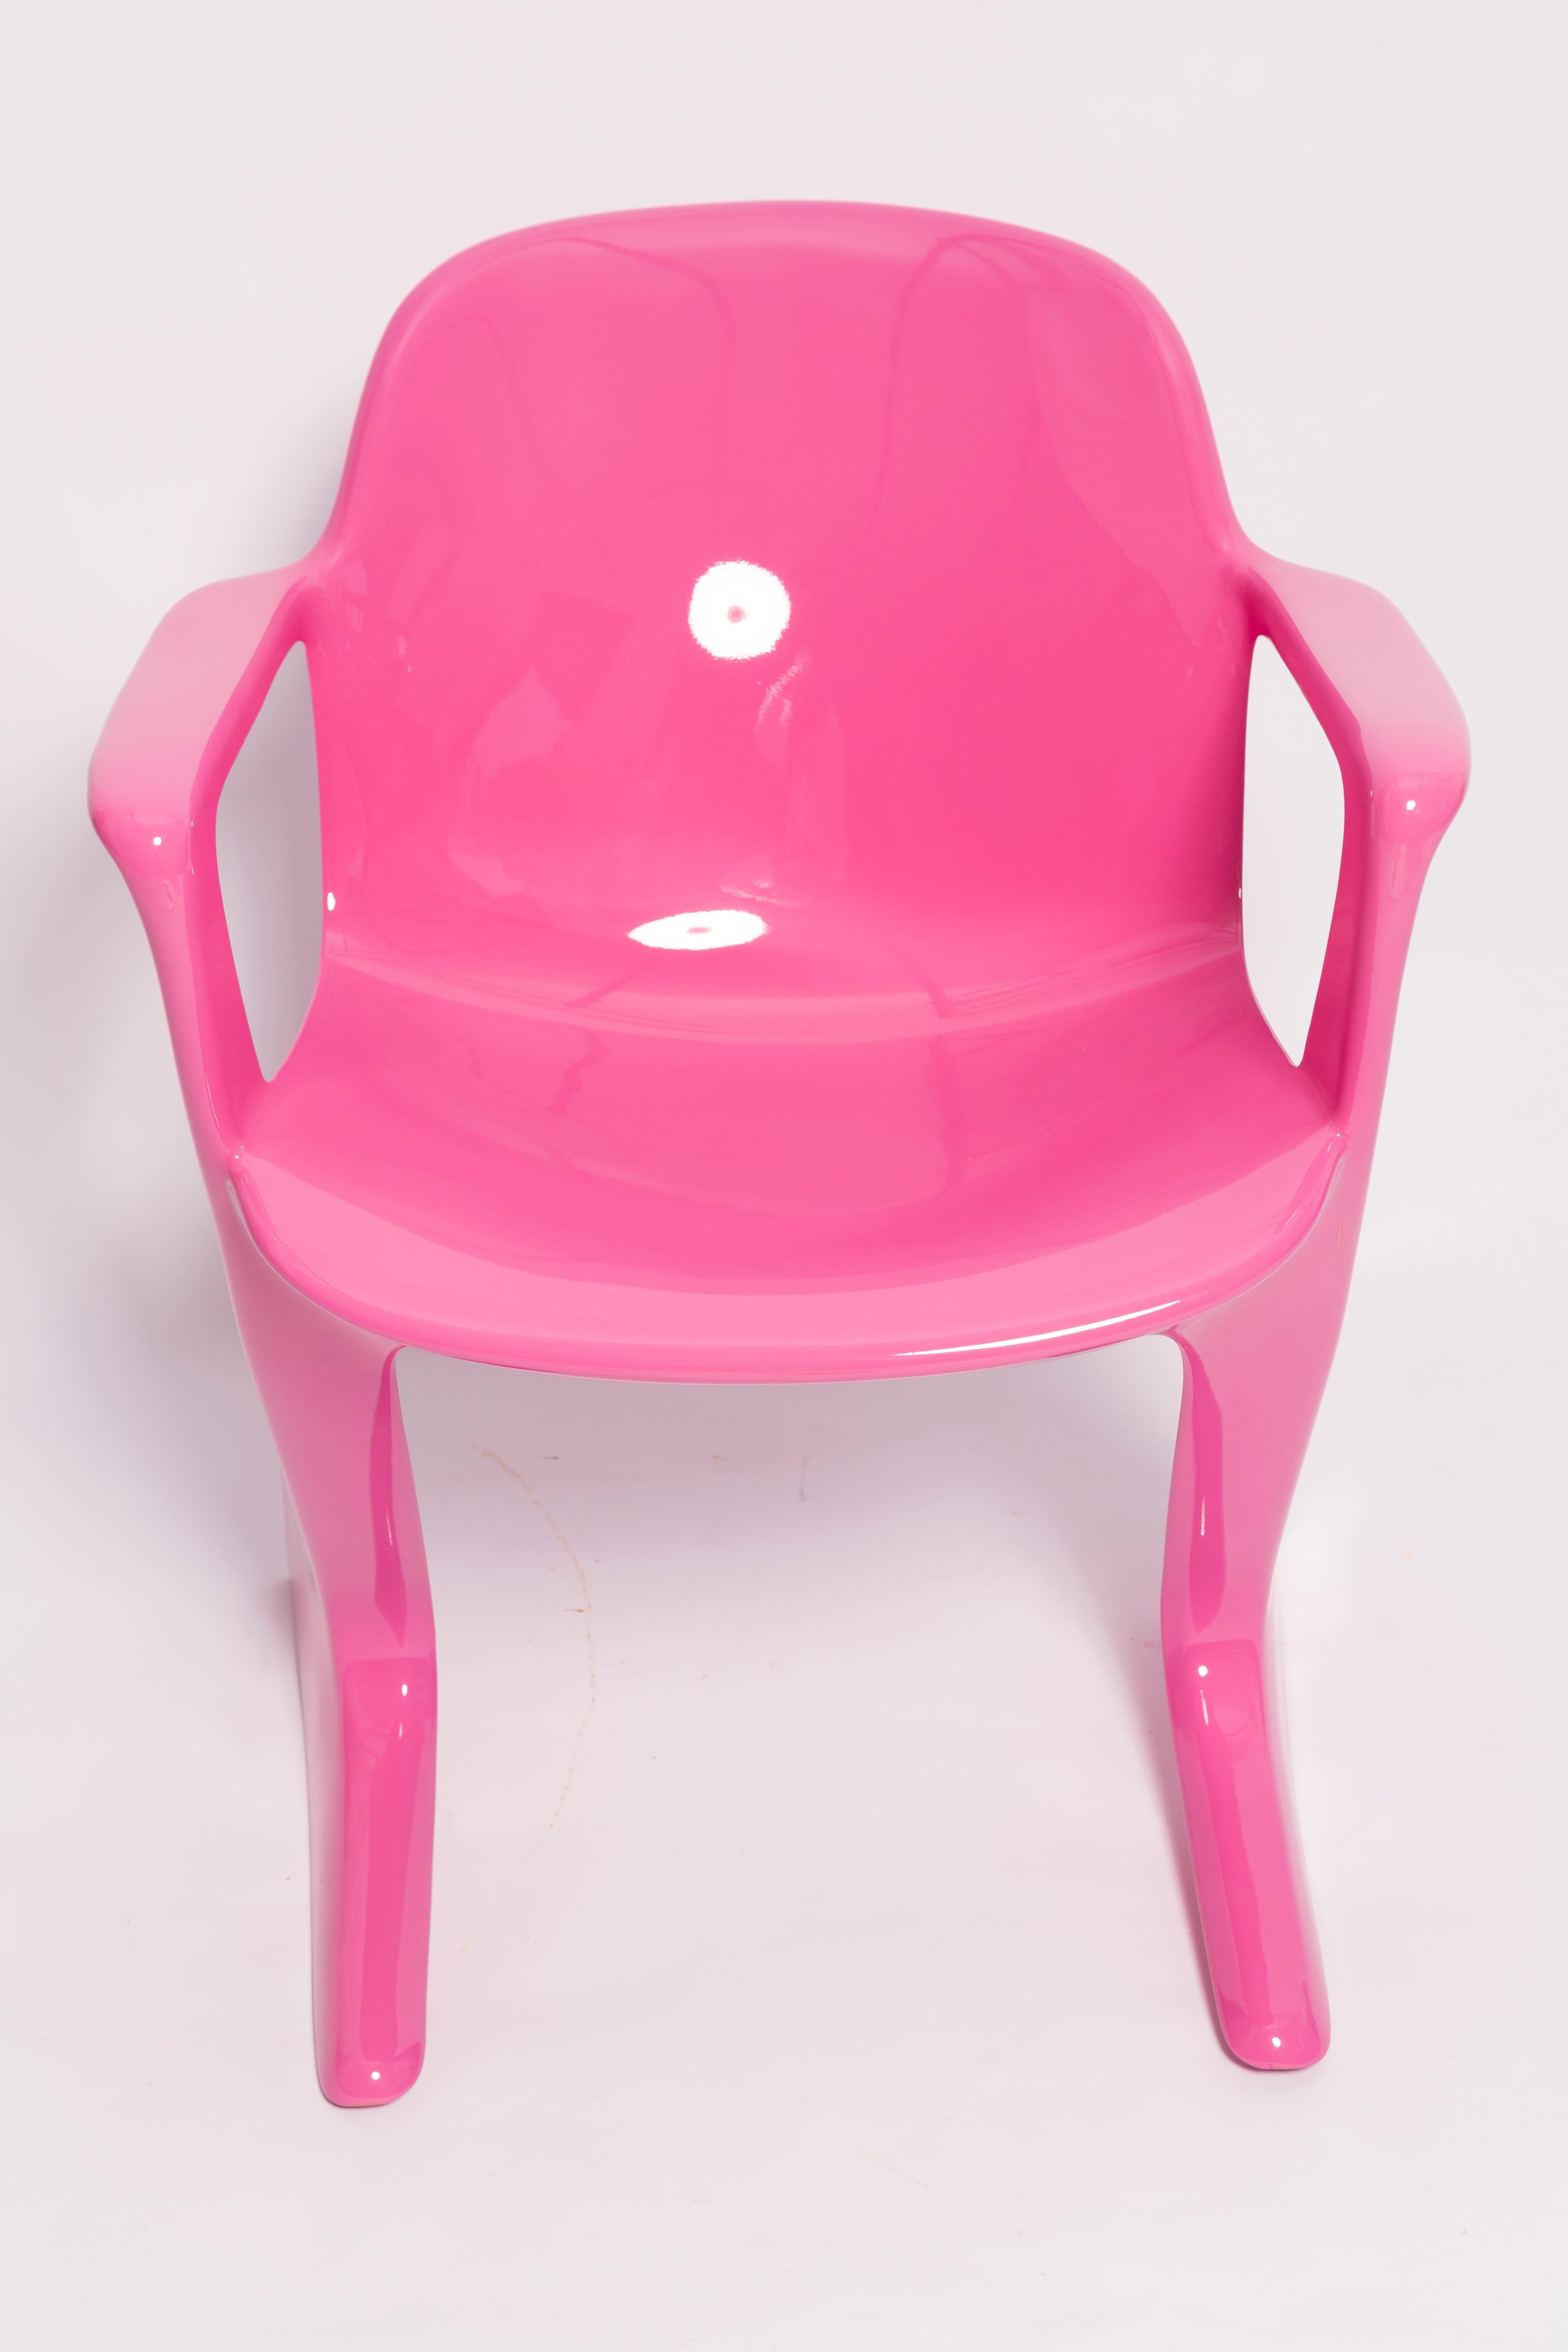 Mid Century Pink Kangaroo Chair Designed by Ernst Moeckl, Germany, 1968 For Sale 1